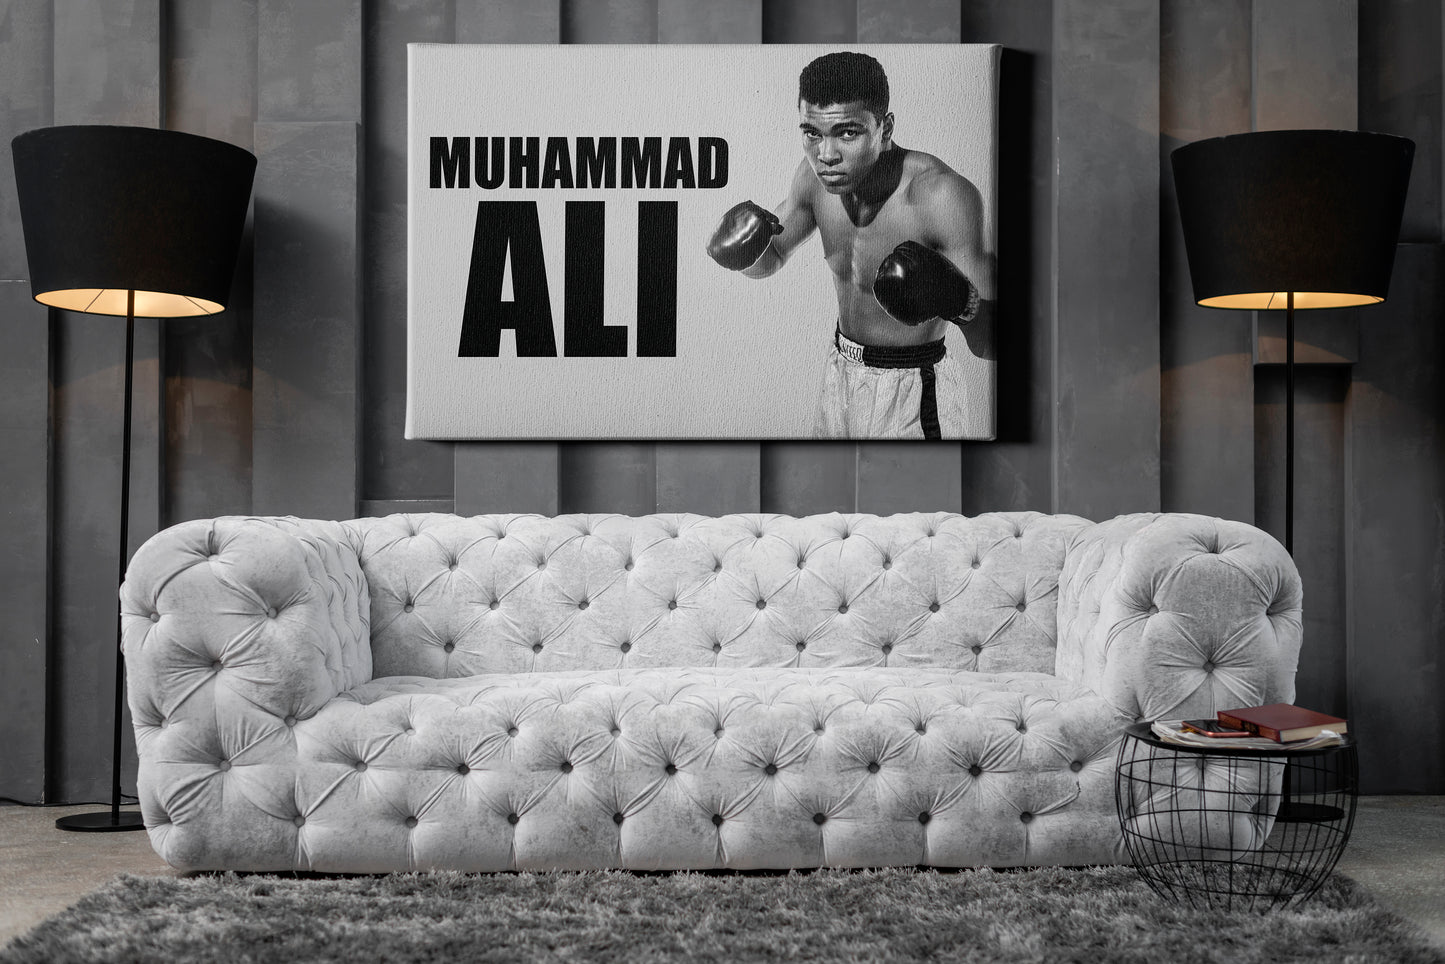 Muhammad Ali Young Poster Boxing Legend Canvas Wall Art Home Decor Framed Art